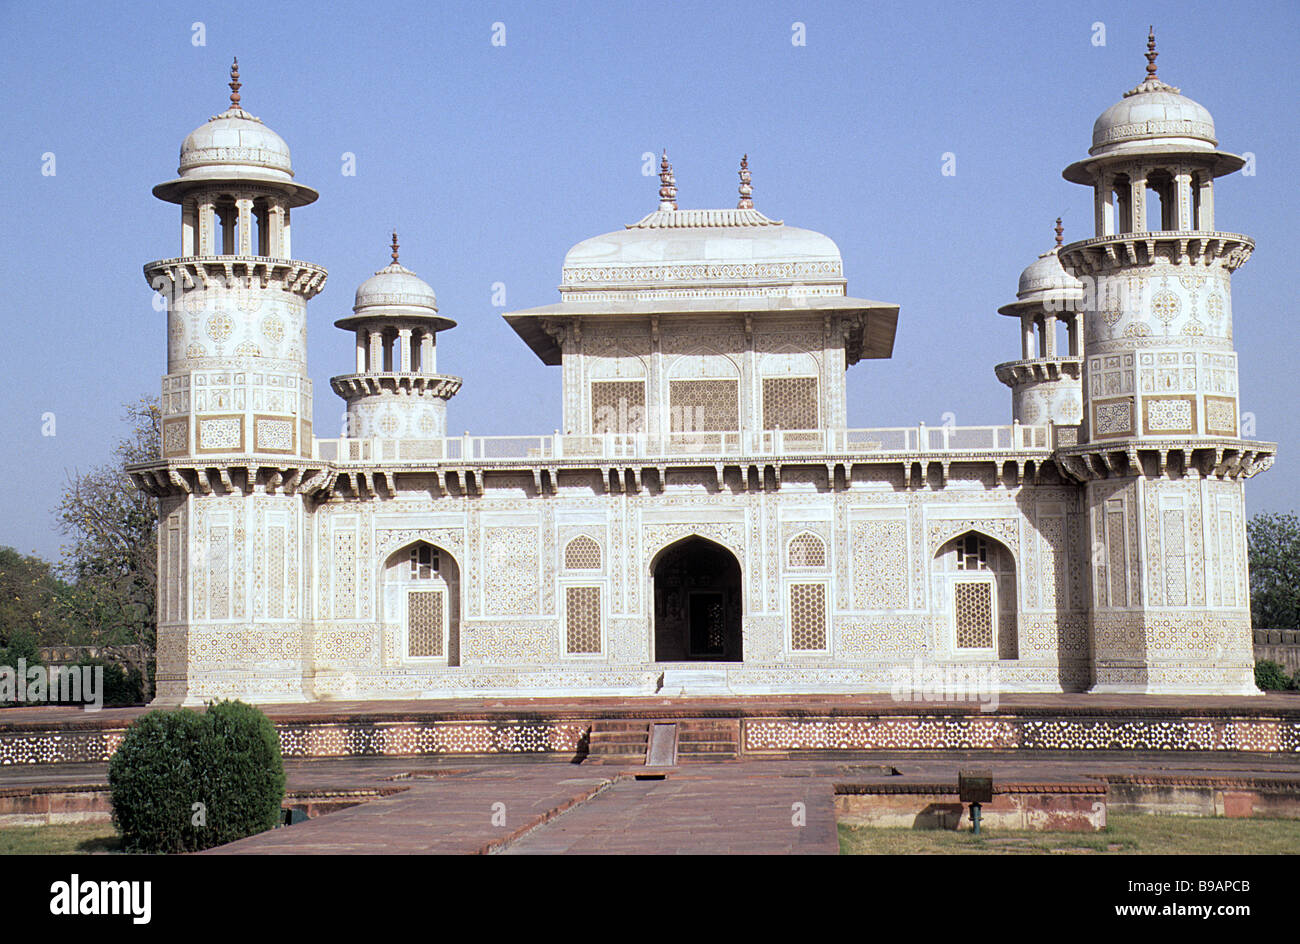 Tomb of Mirza Ghiyas-ud-Din at Agra, India. Stock Photo